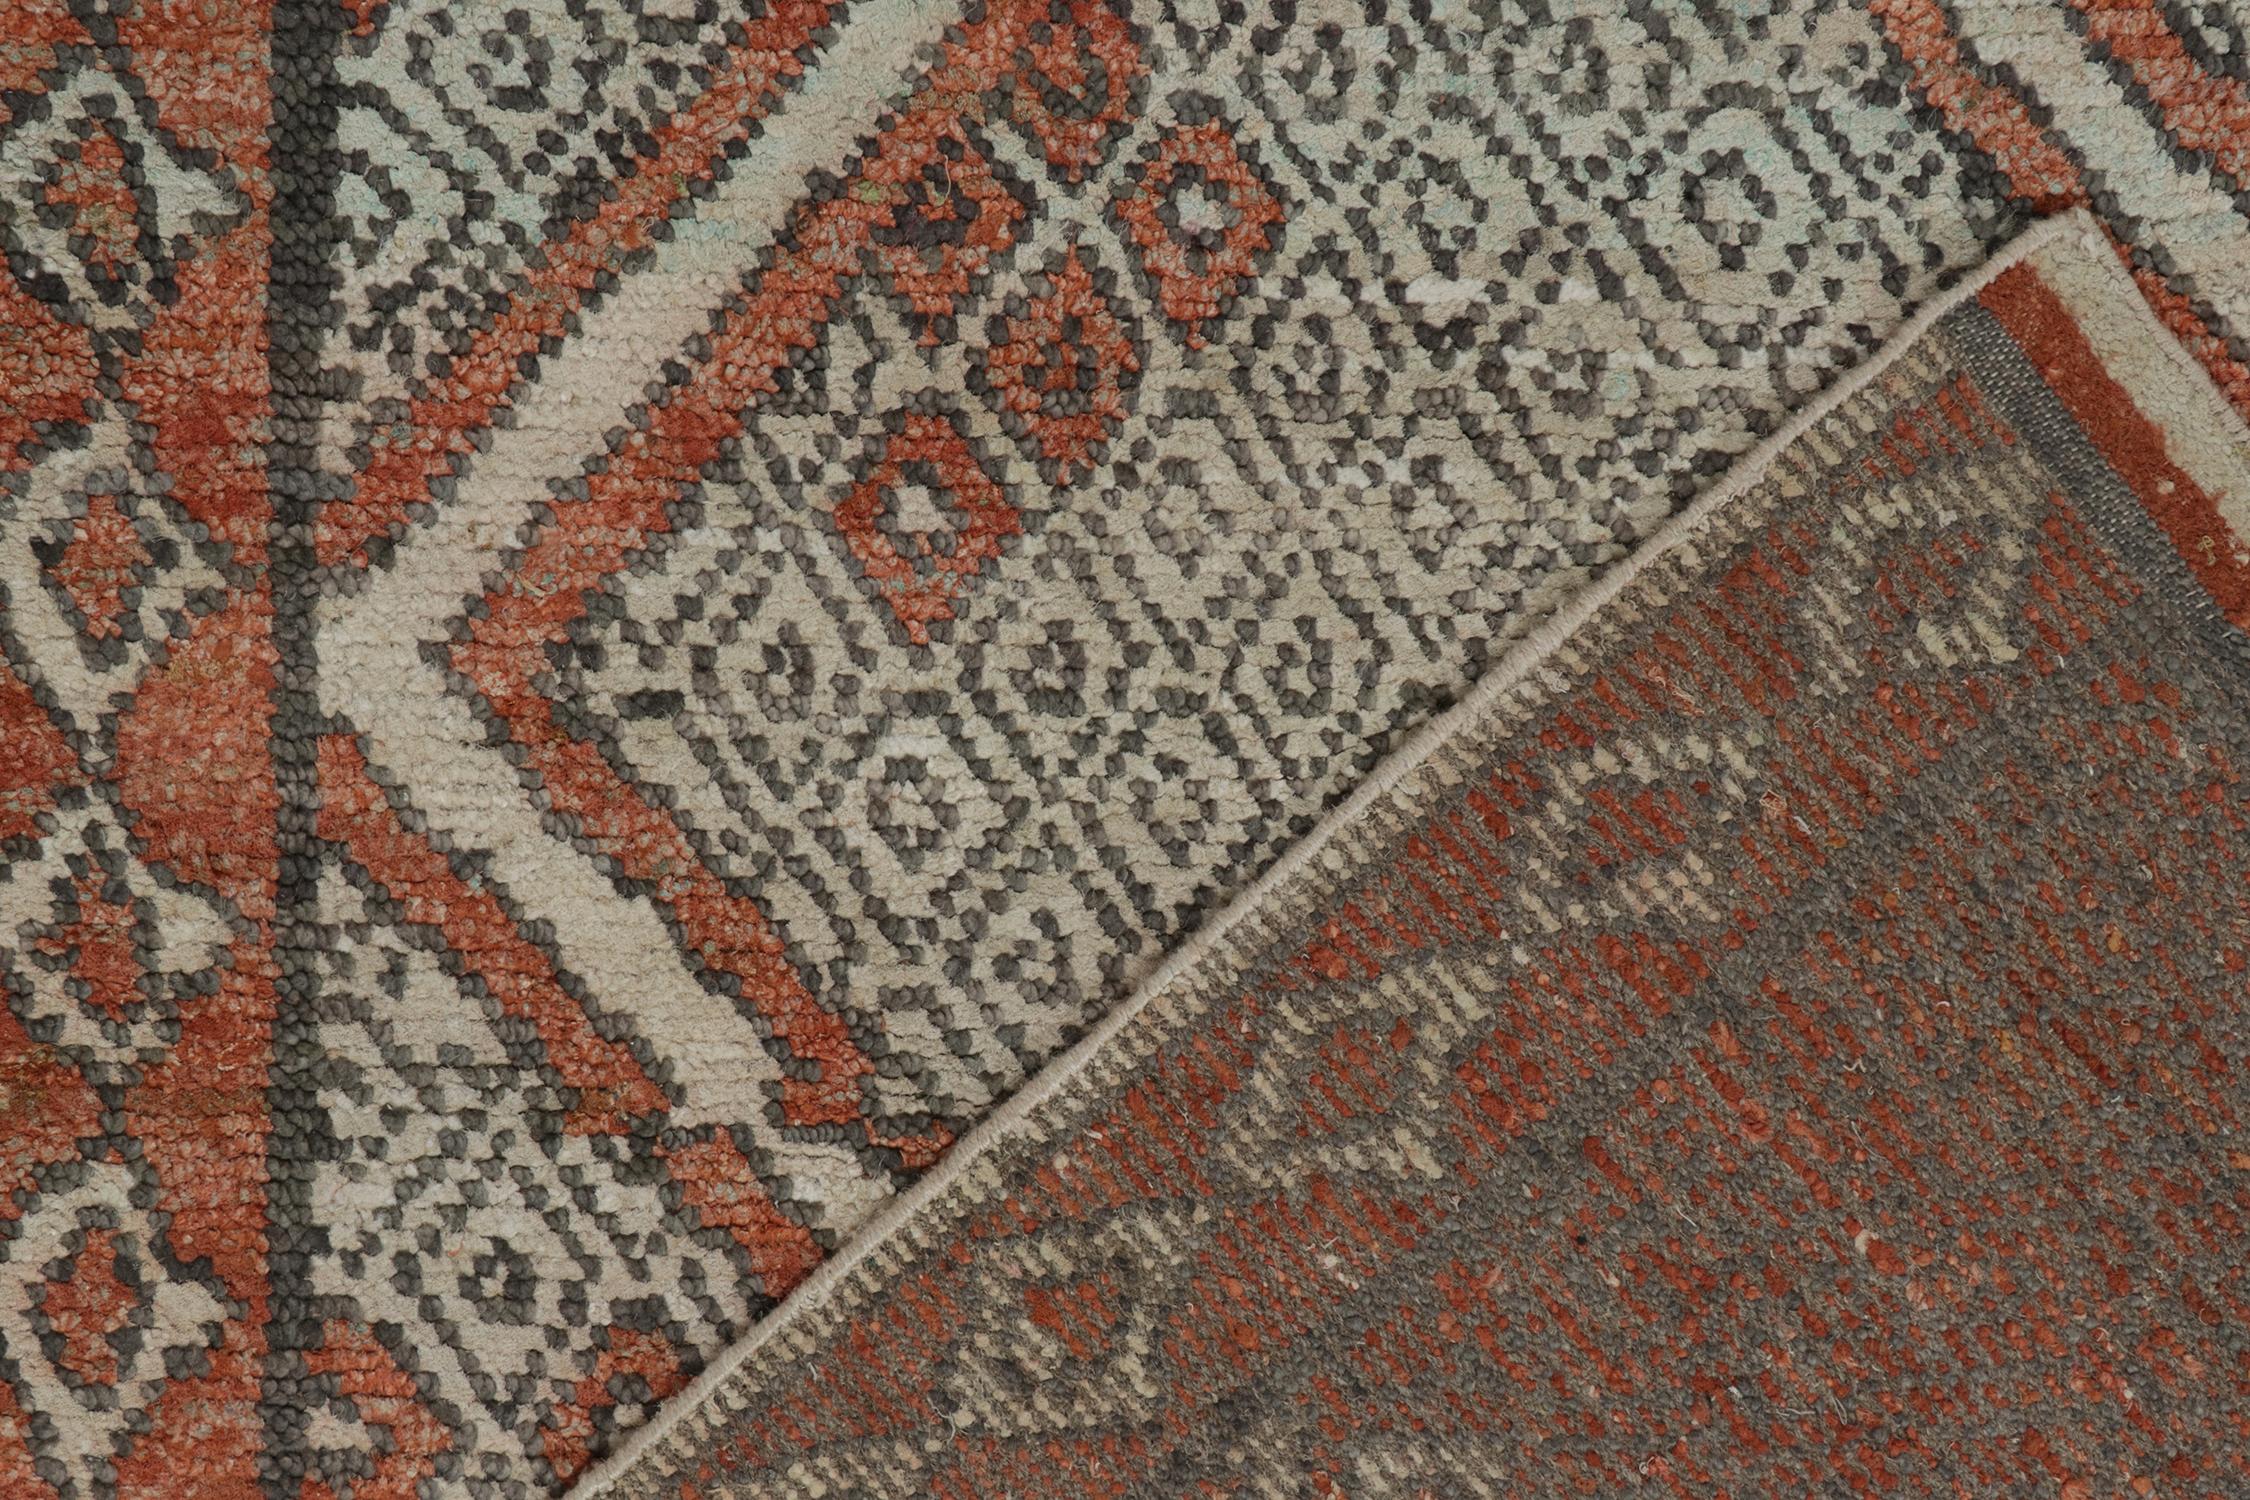 Contemporary Rug & Kilim’s Moroccan Style Rug in Auburn Red and Gray Diamond Patterns For Sale